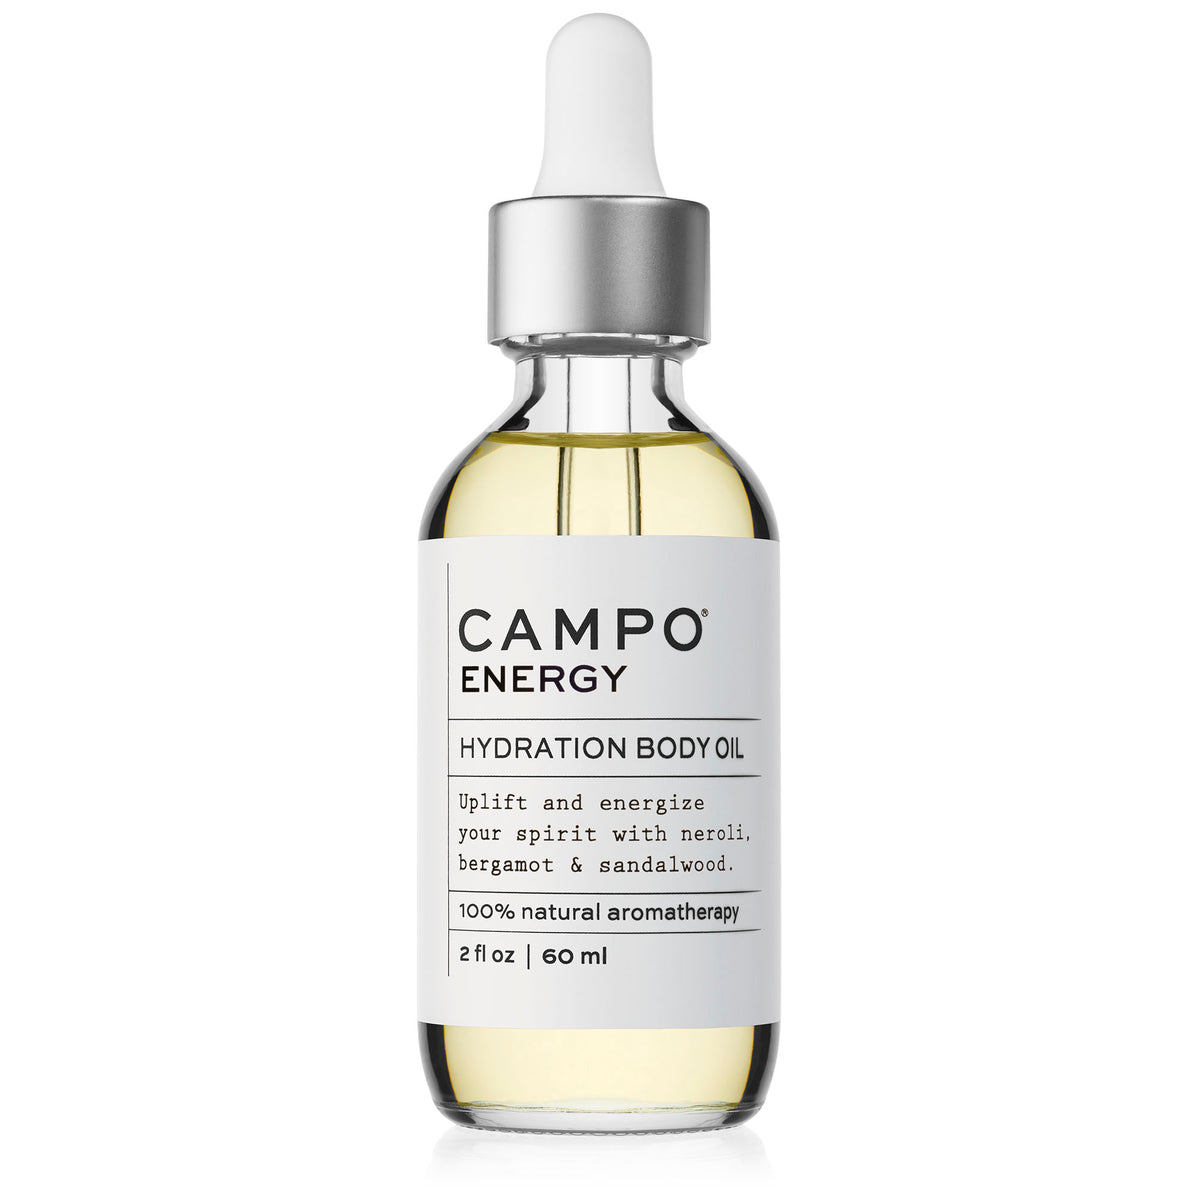 Campo Beauty Hydration Belly Oil - ENERGY Blend that in 60 ml. Restores a sense of vitality and alertness.  Gives your skin an instant glow and an infusion of nourishing deep hydration.  An uplifting blend of 100% pure essential oils with rich citrus notes of Italian Neroli Orange Blossom, Bergamot, Sweet Orange, and Bitter Orange with a hint of Australian Sandalwood. Blended with 100% natural beauty carrier oils. Feel the energy inside and out. 